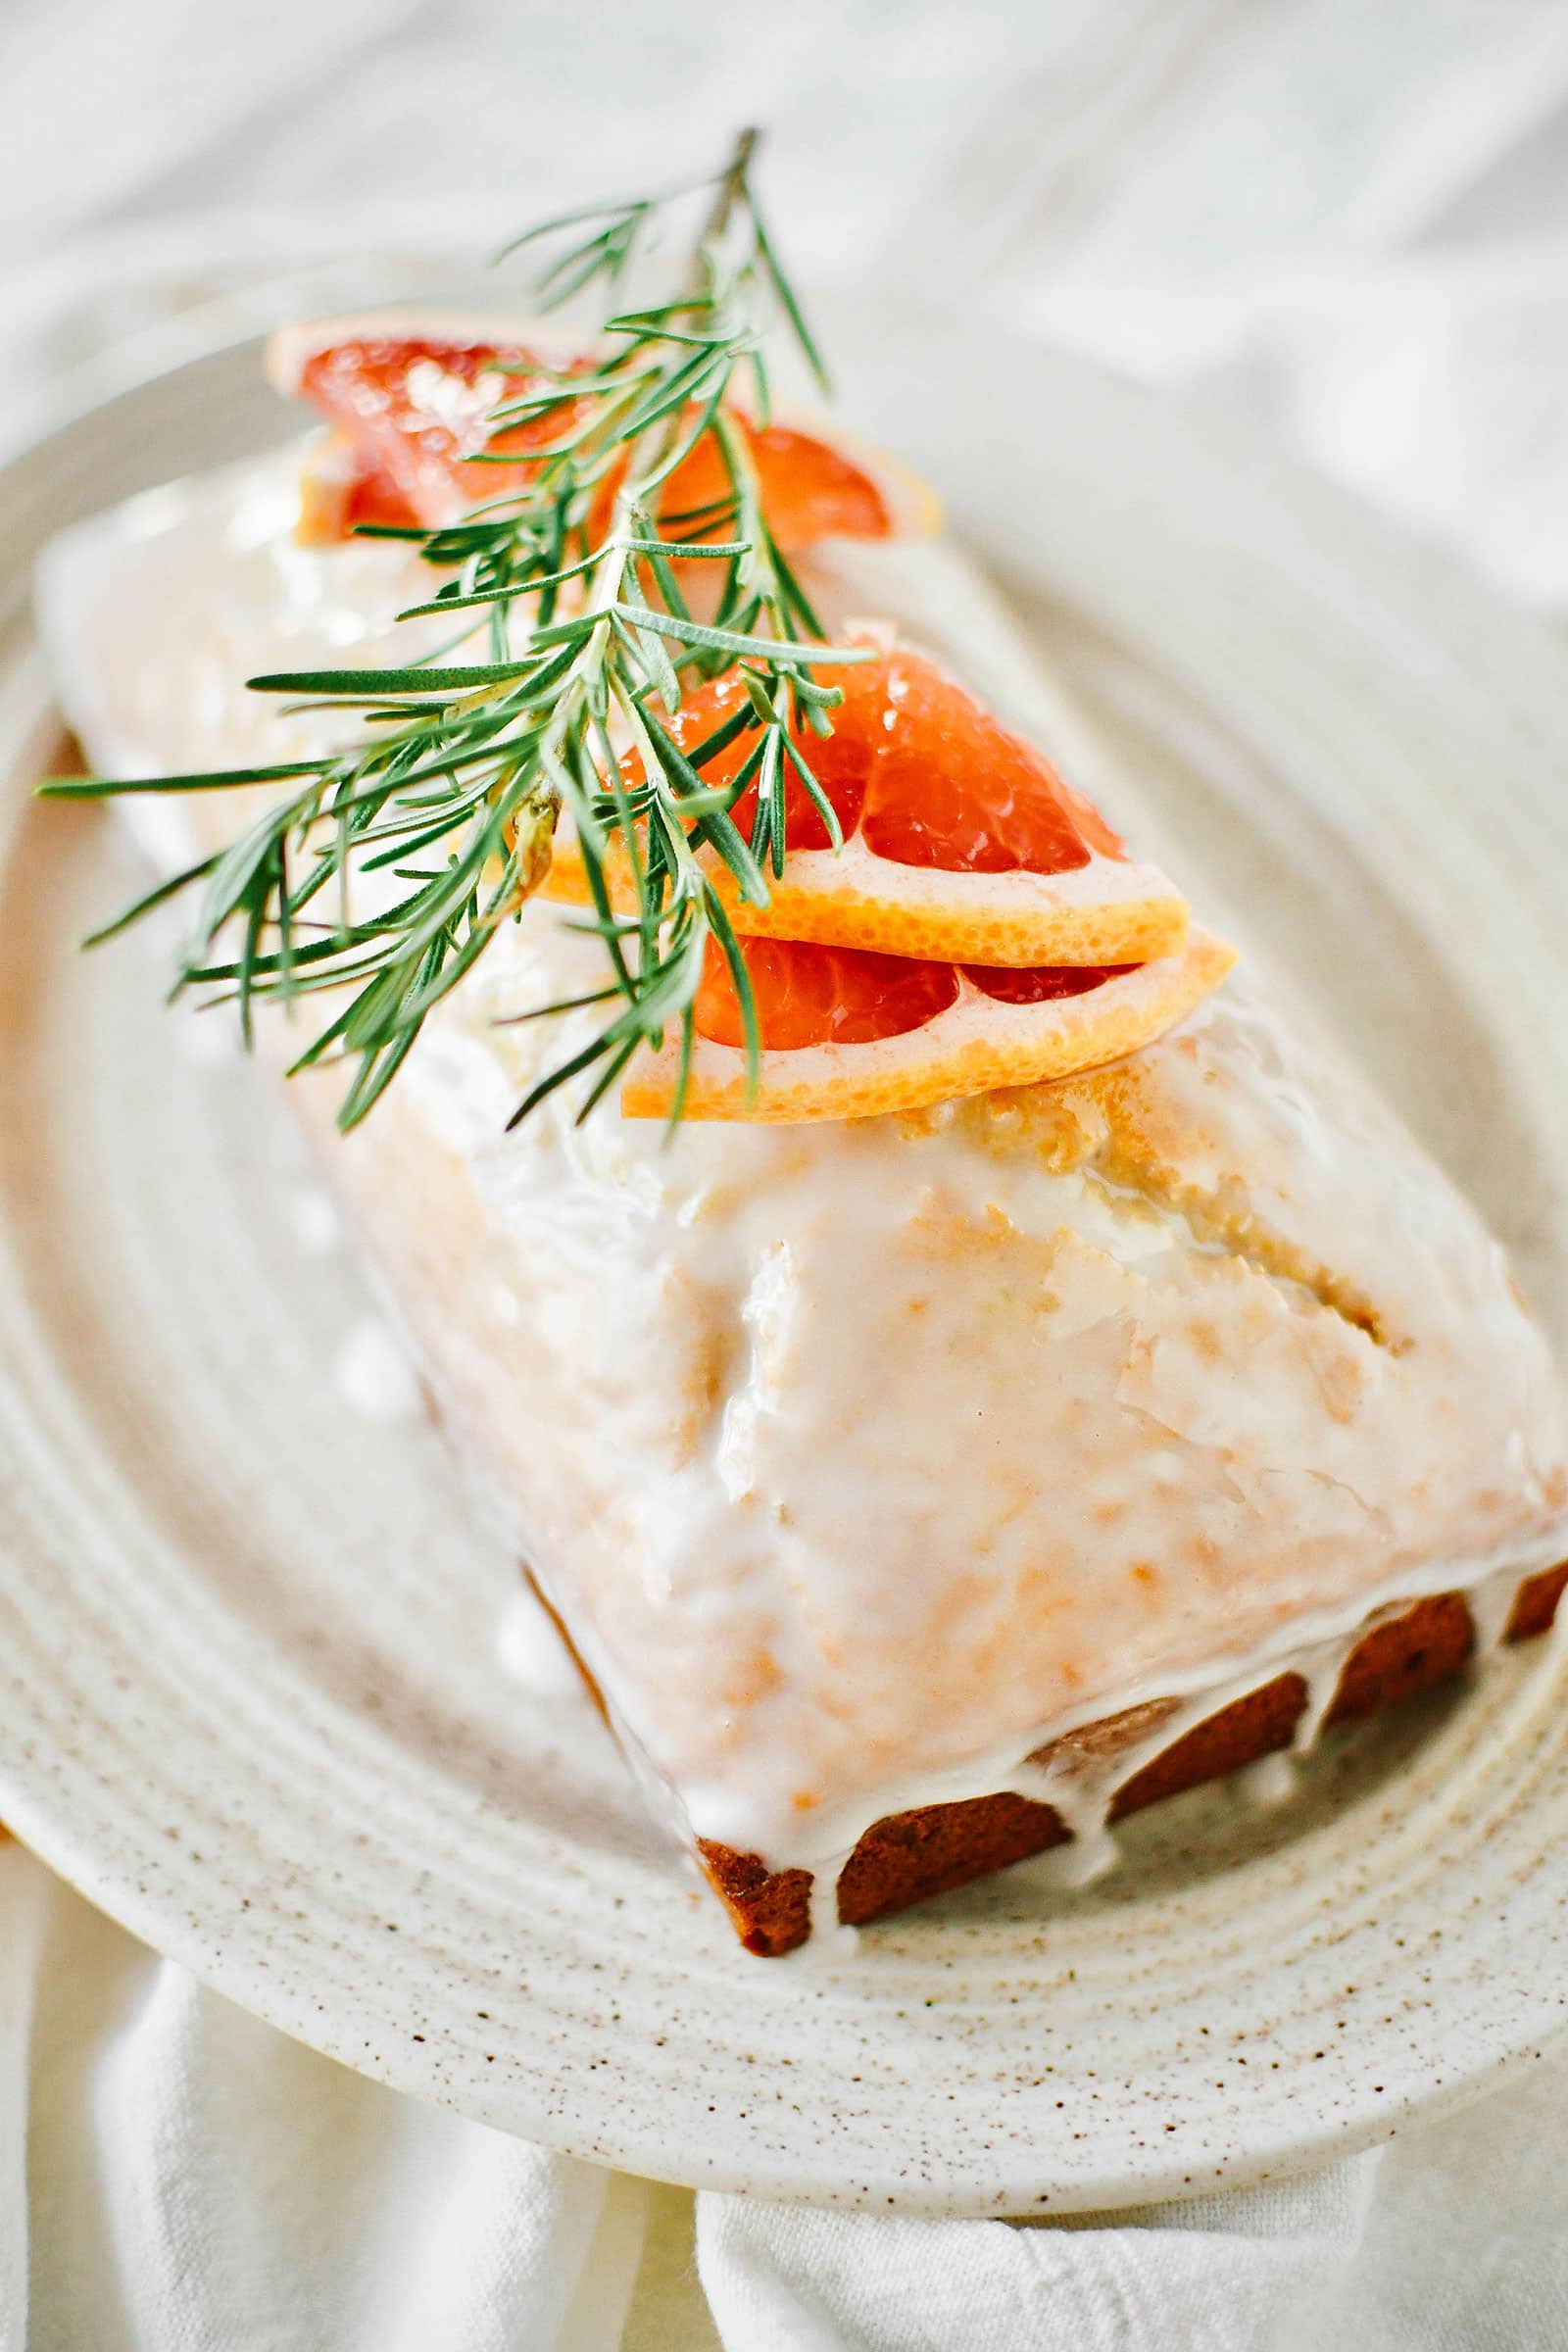 A glazed loaf of grapefruit-rosemary bread garnished with grapefruit slices and a rosemary sprig on top